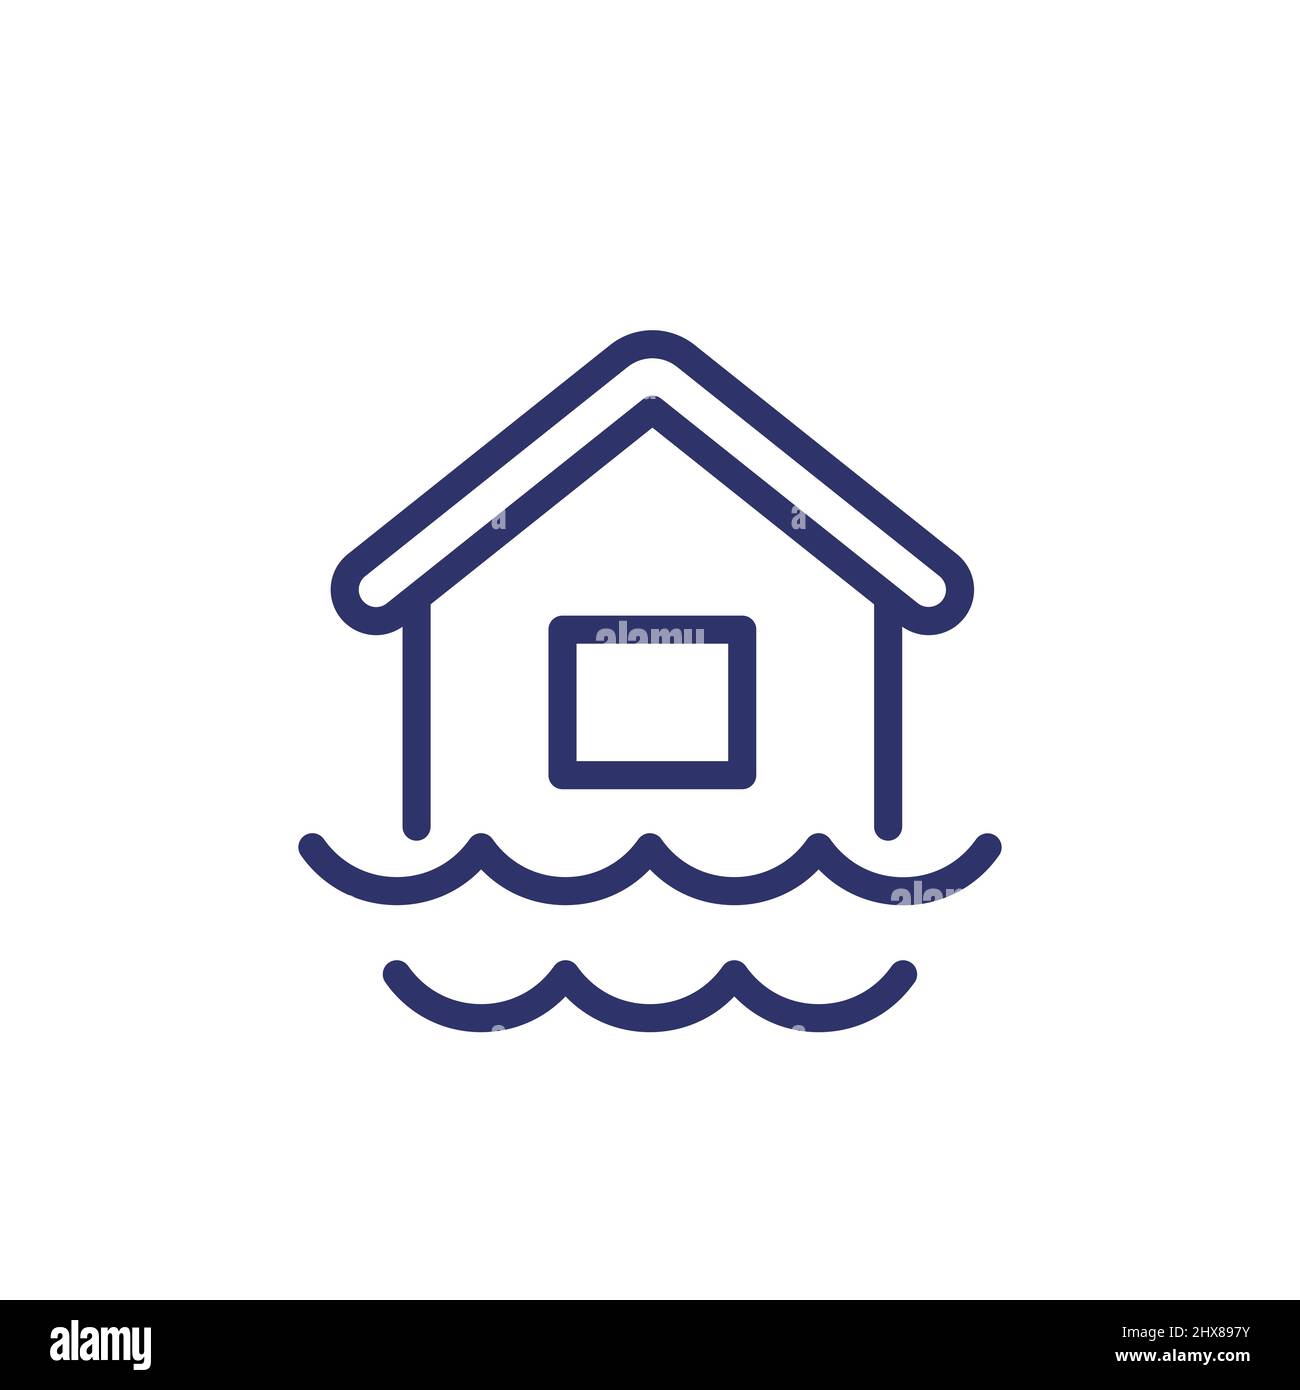 Flood line icon with a house Stock Vector